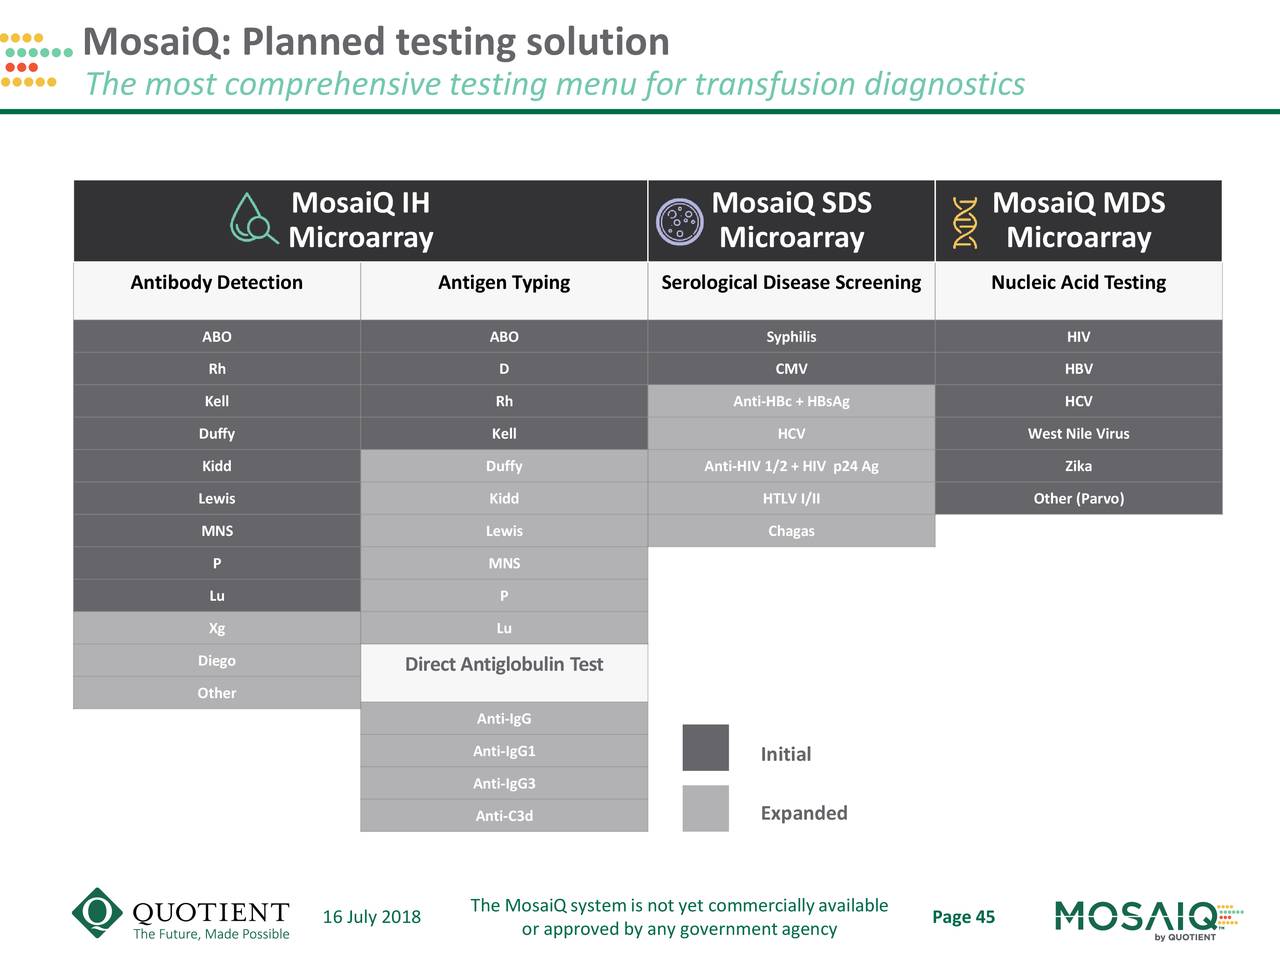 MosaiQ: Planned testing solution